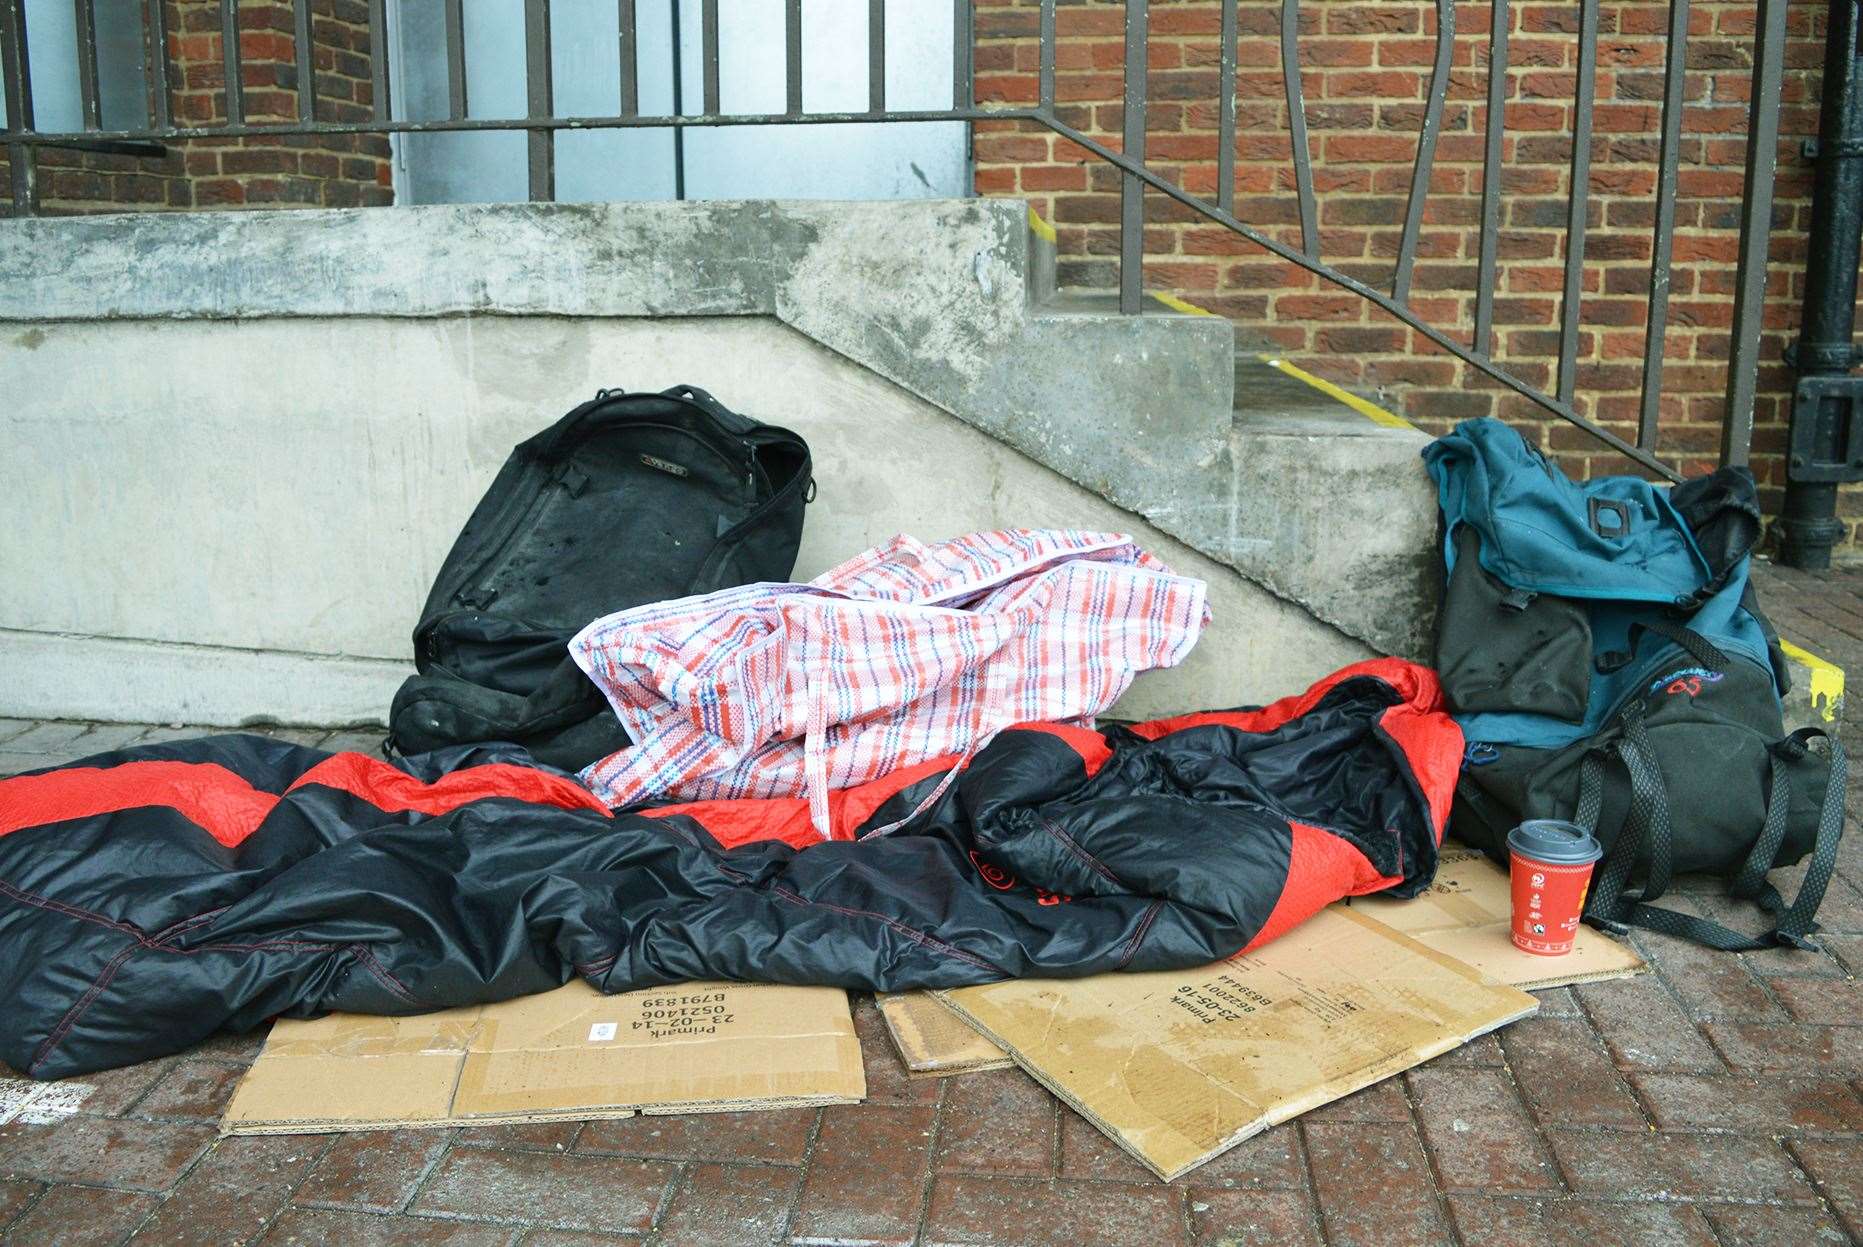 Porchlight has warned of a return to rough sleeping. Photo: Porchlight